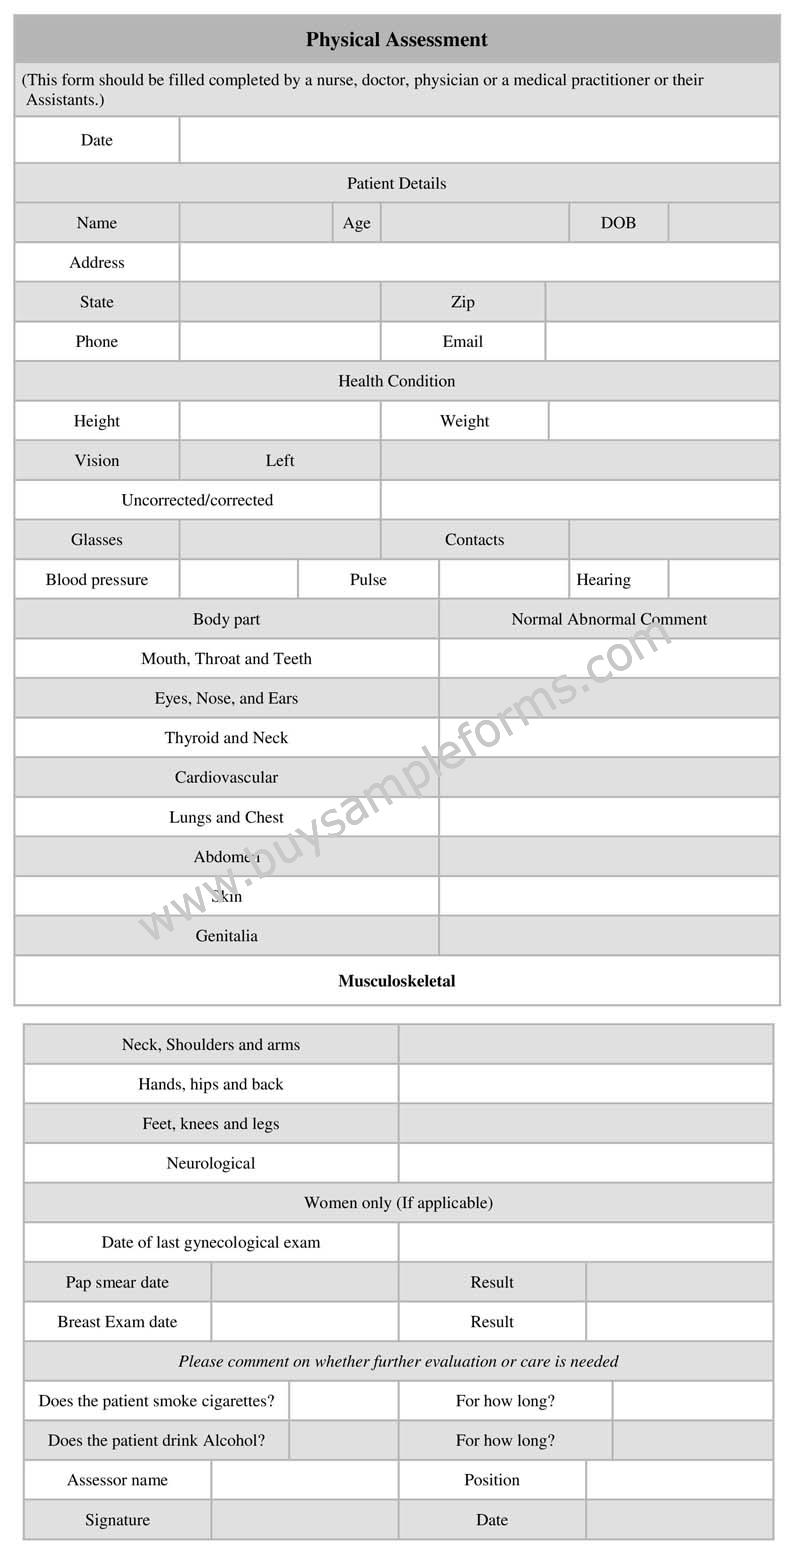 Printable Physical Assessment Form Word Template, Example